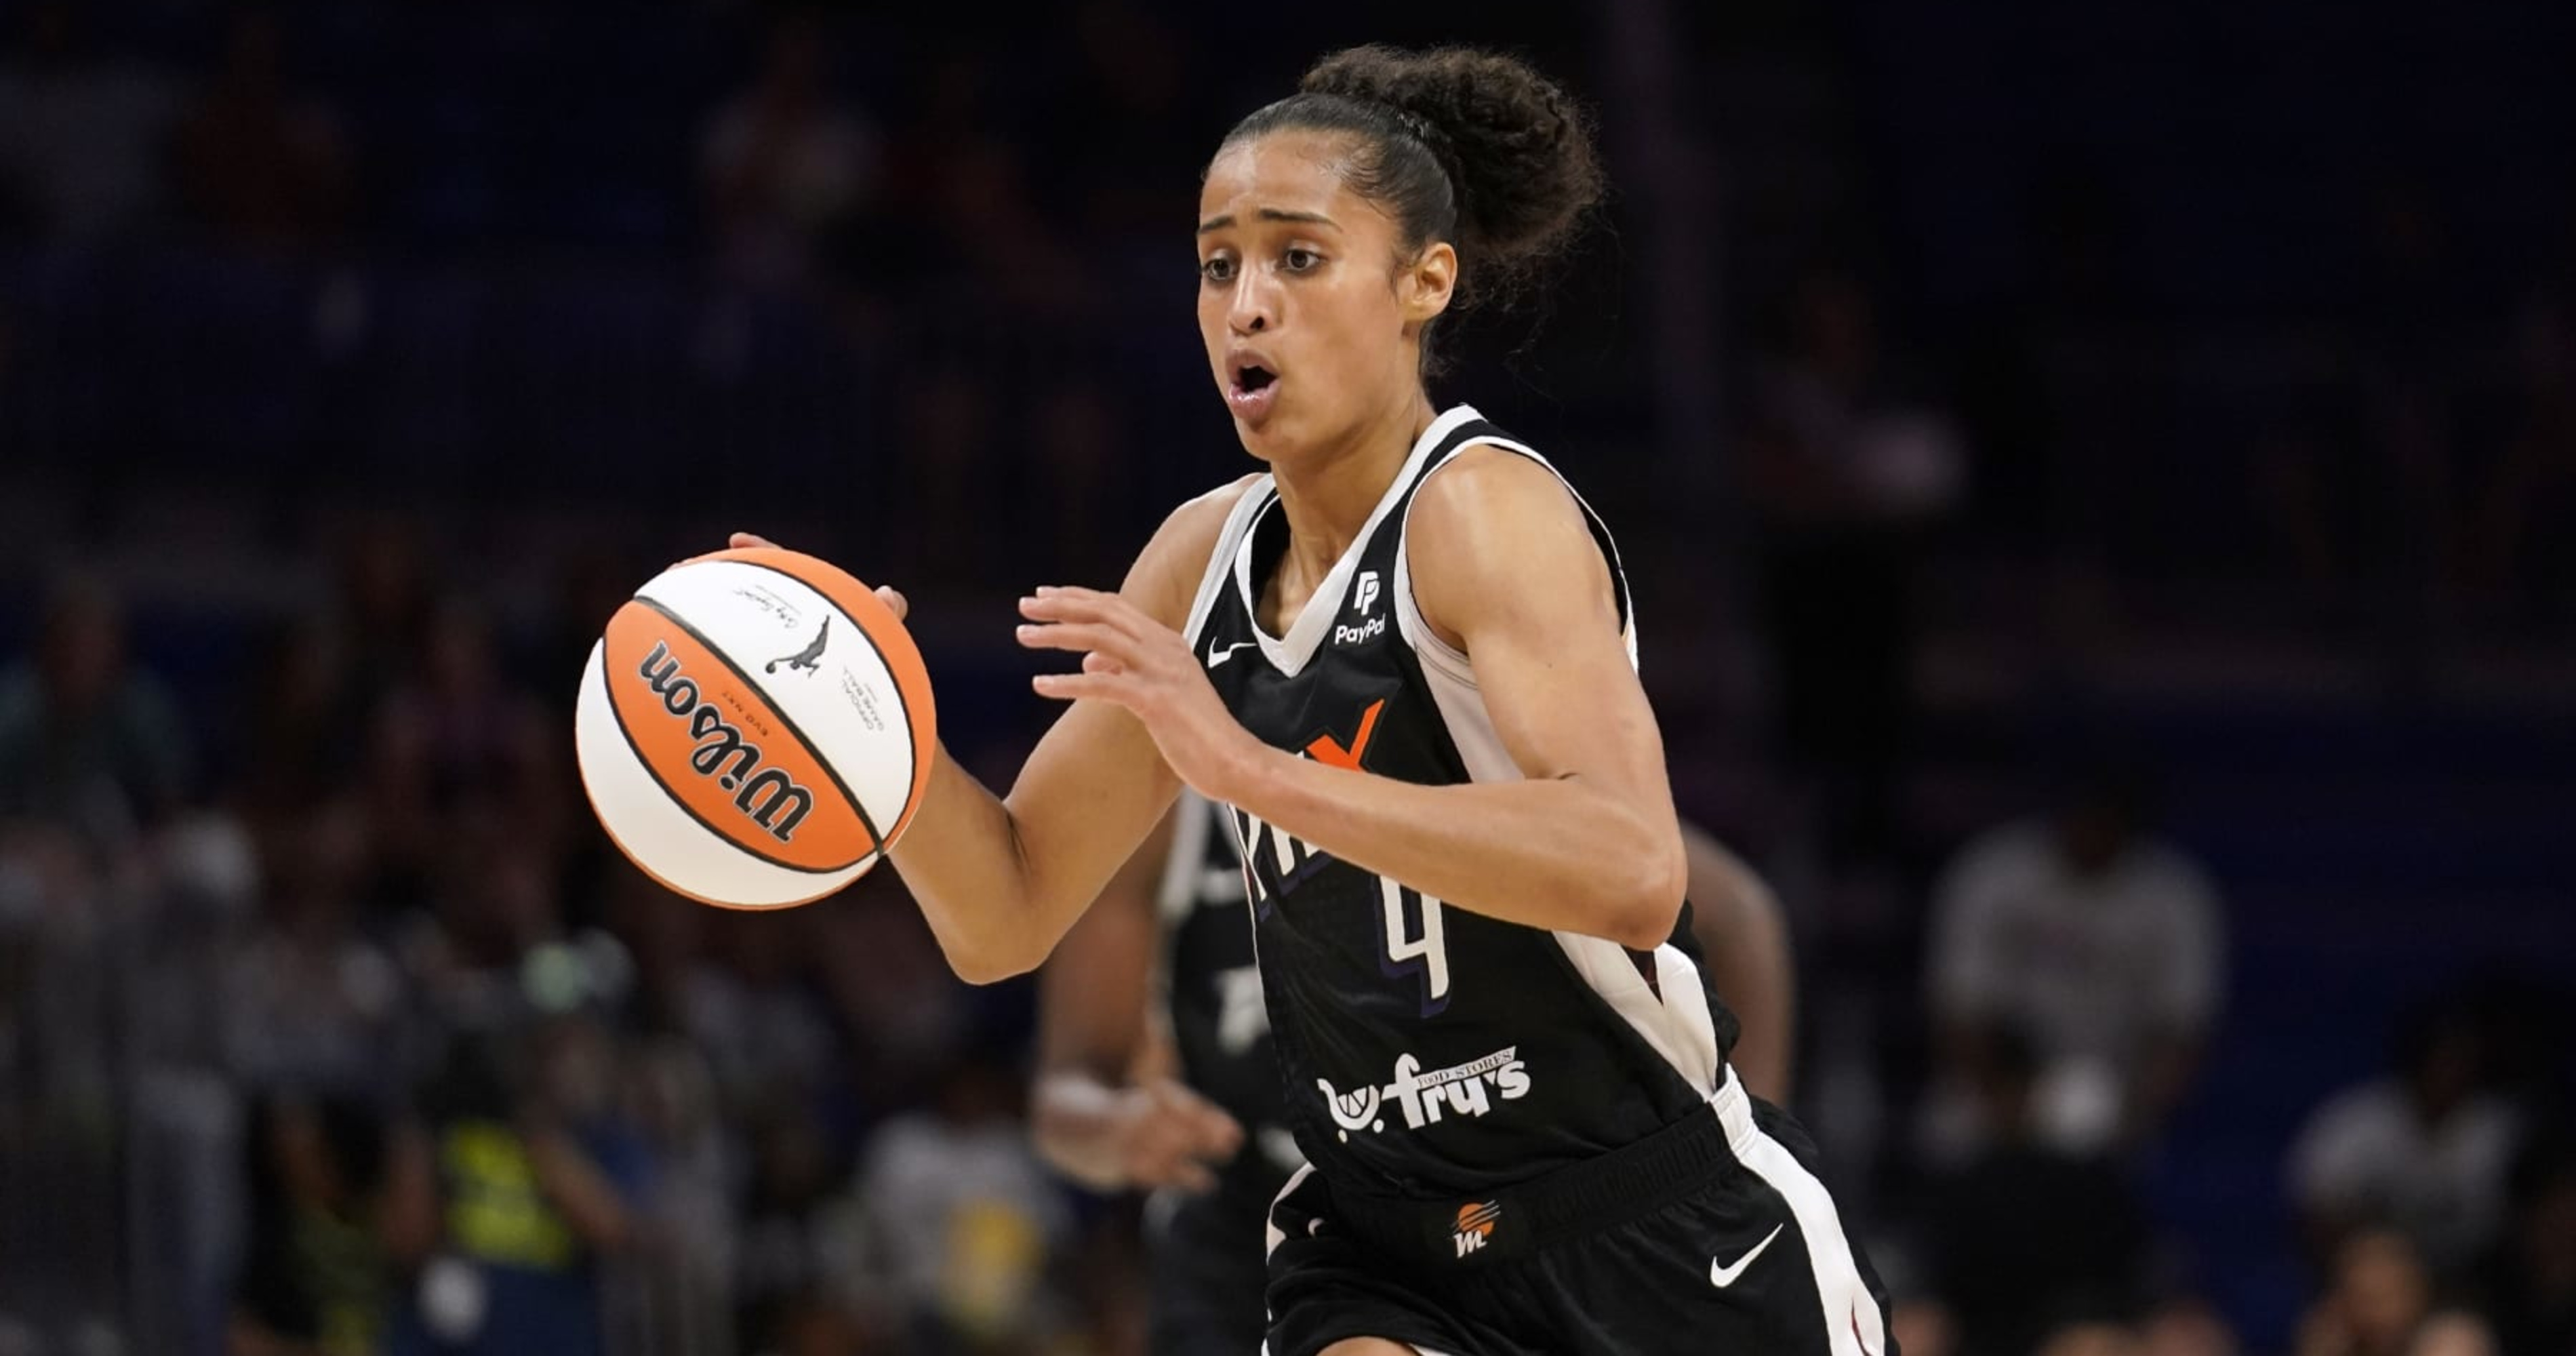 WNBA Trade Deadline 2022 Date, End Time, Top Rumors and Speculation